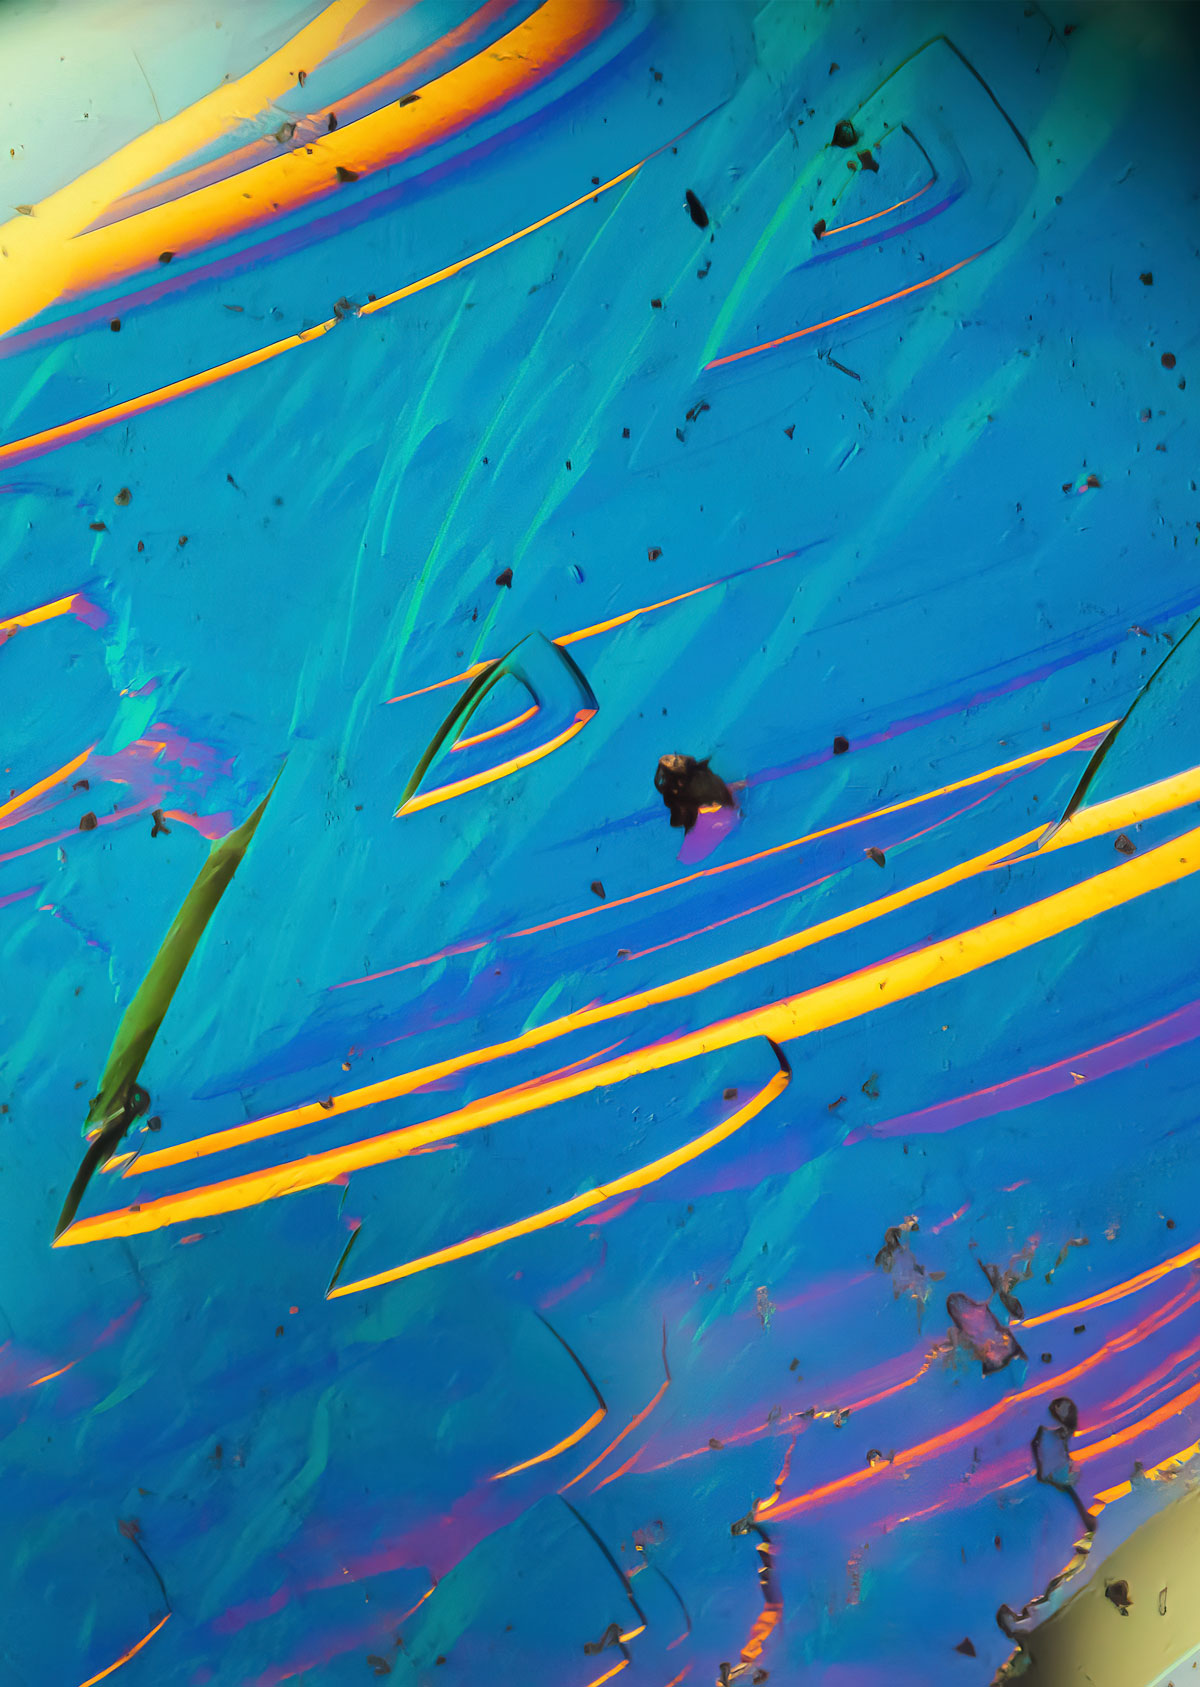 Differential Interface Contrast (DIC) image of a transparent crystal